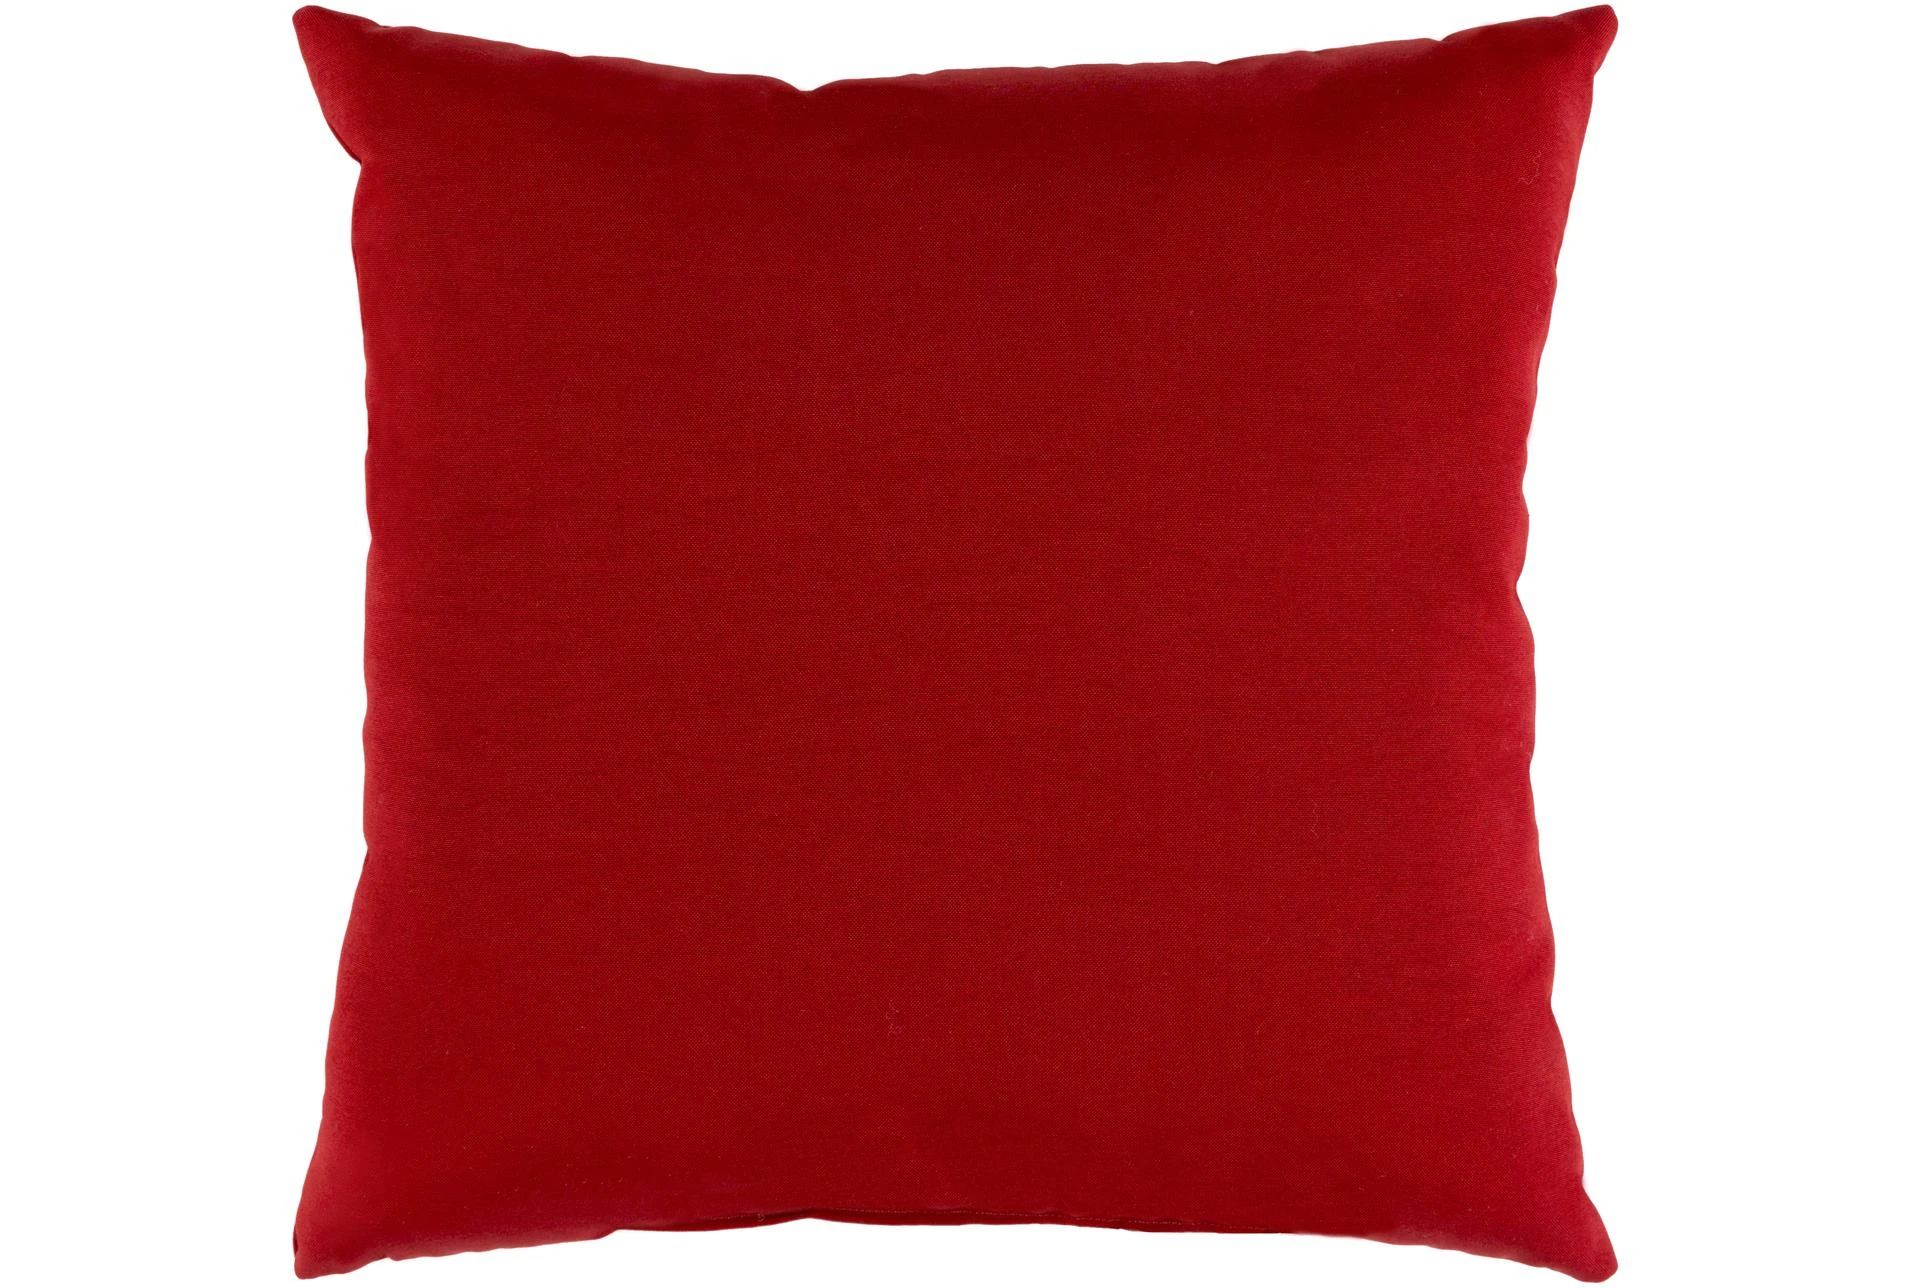 279080 Red Fabric Pillow Signature 01 ?w=1911&h=1288&mode=pad